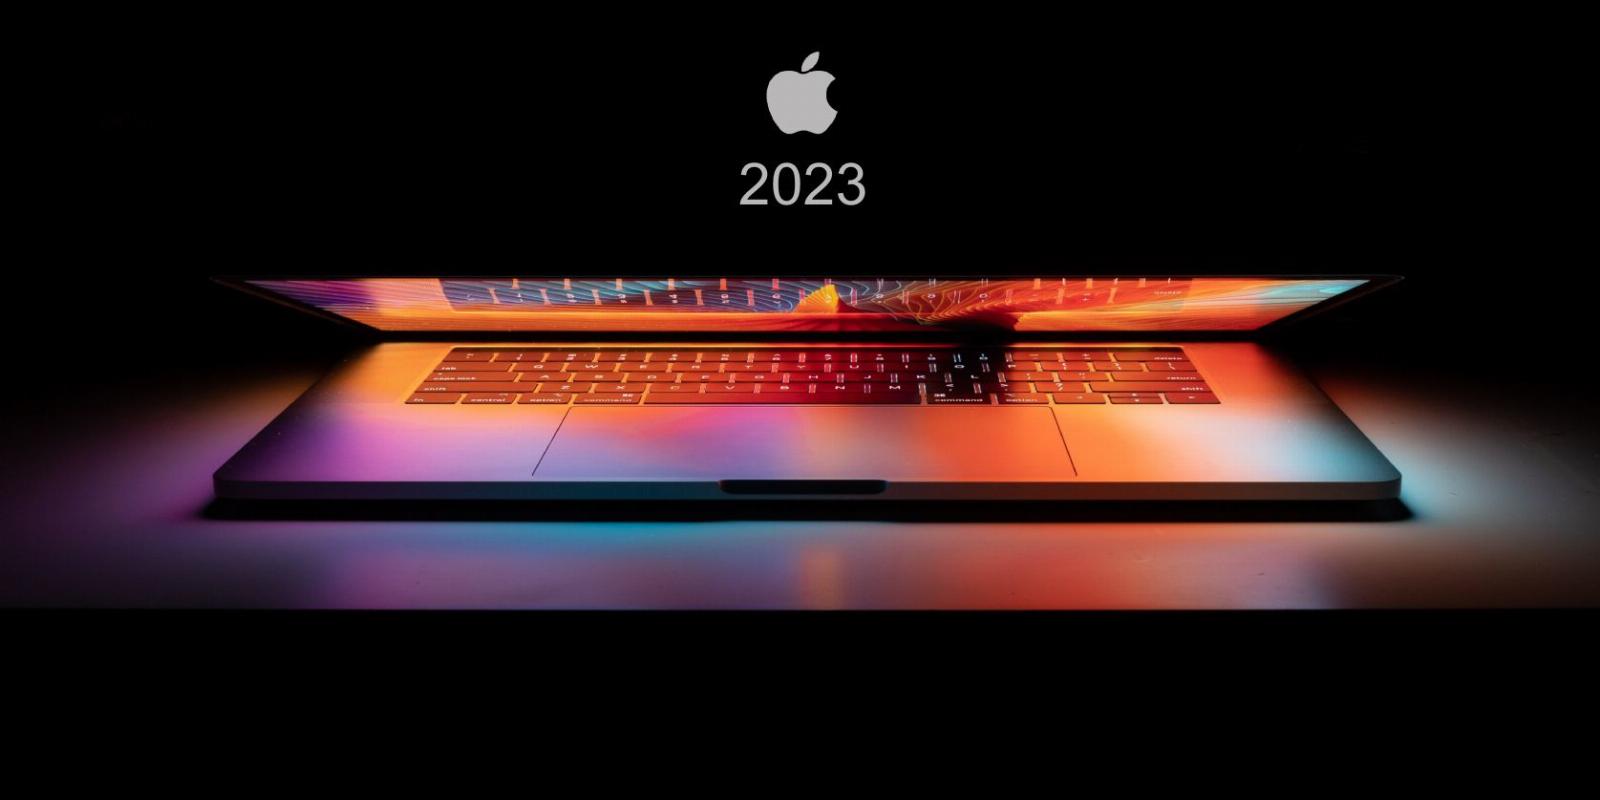 What Can We Expect From a New MacBook Pro in 2023?